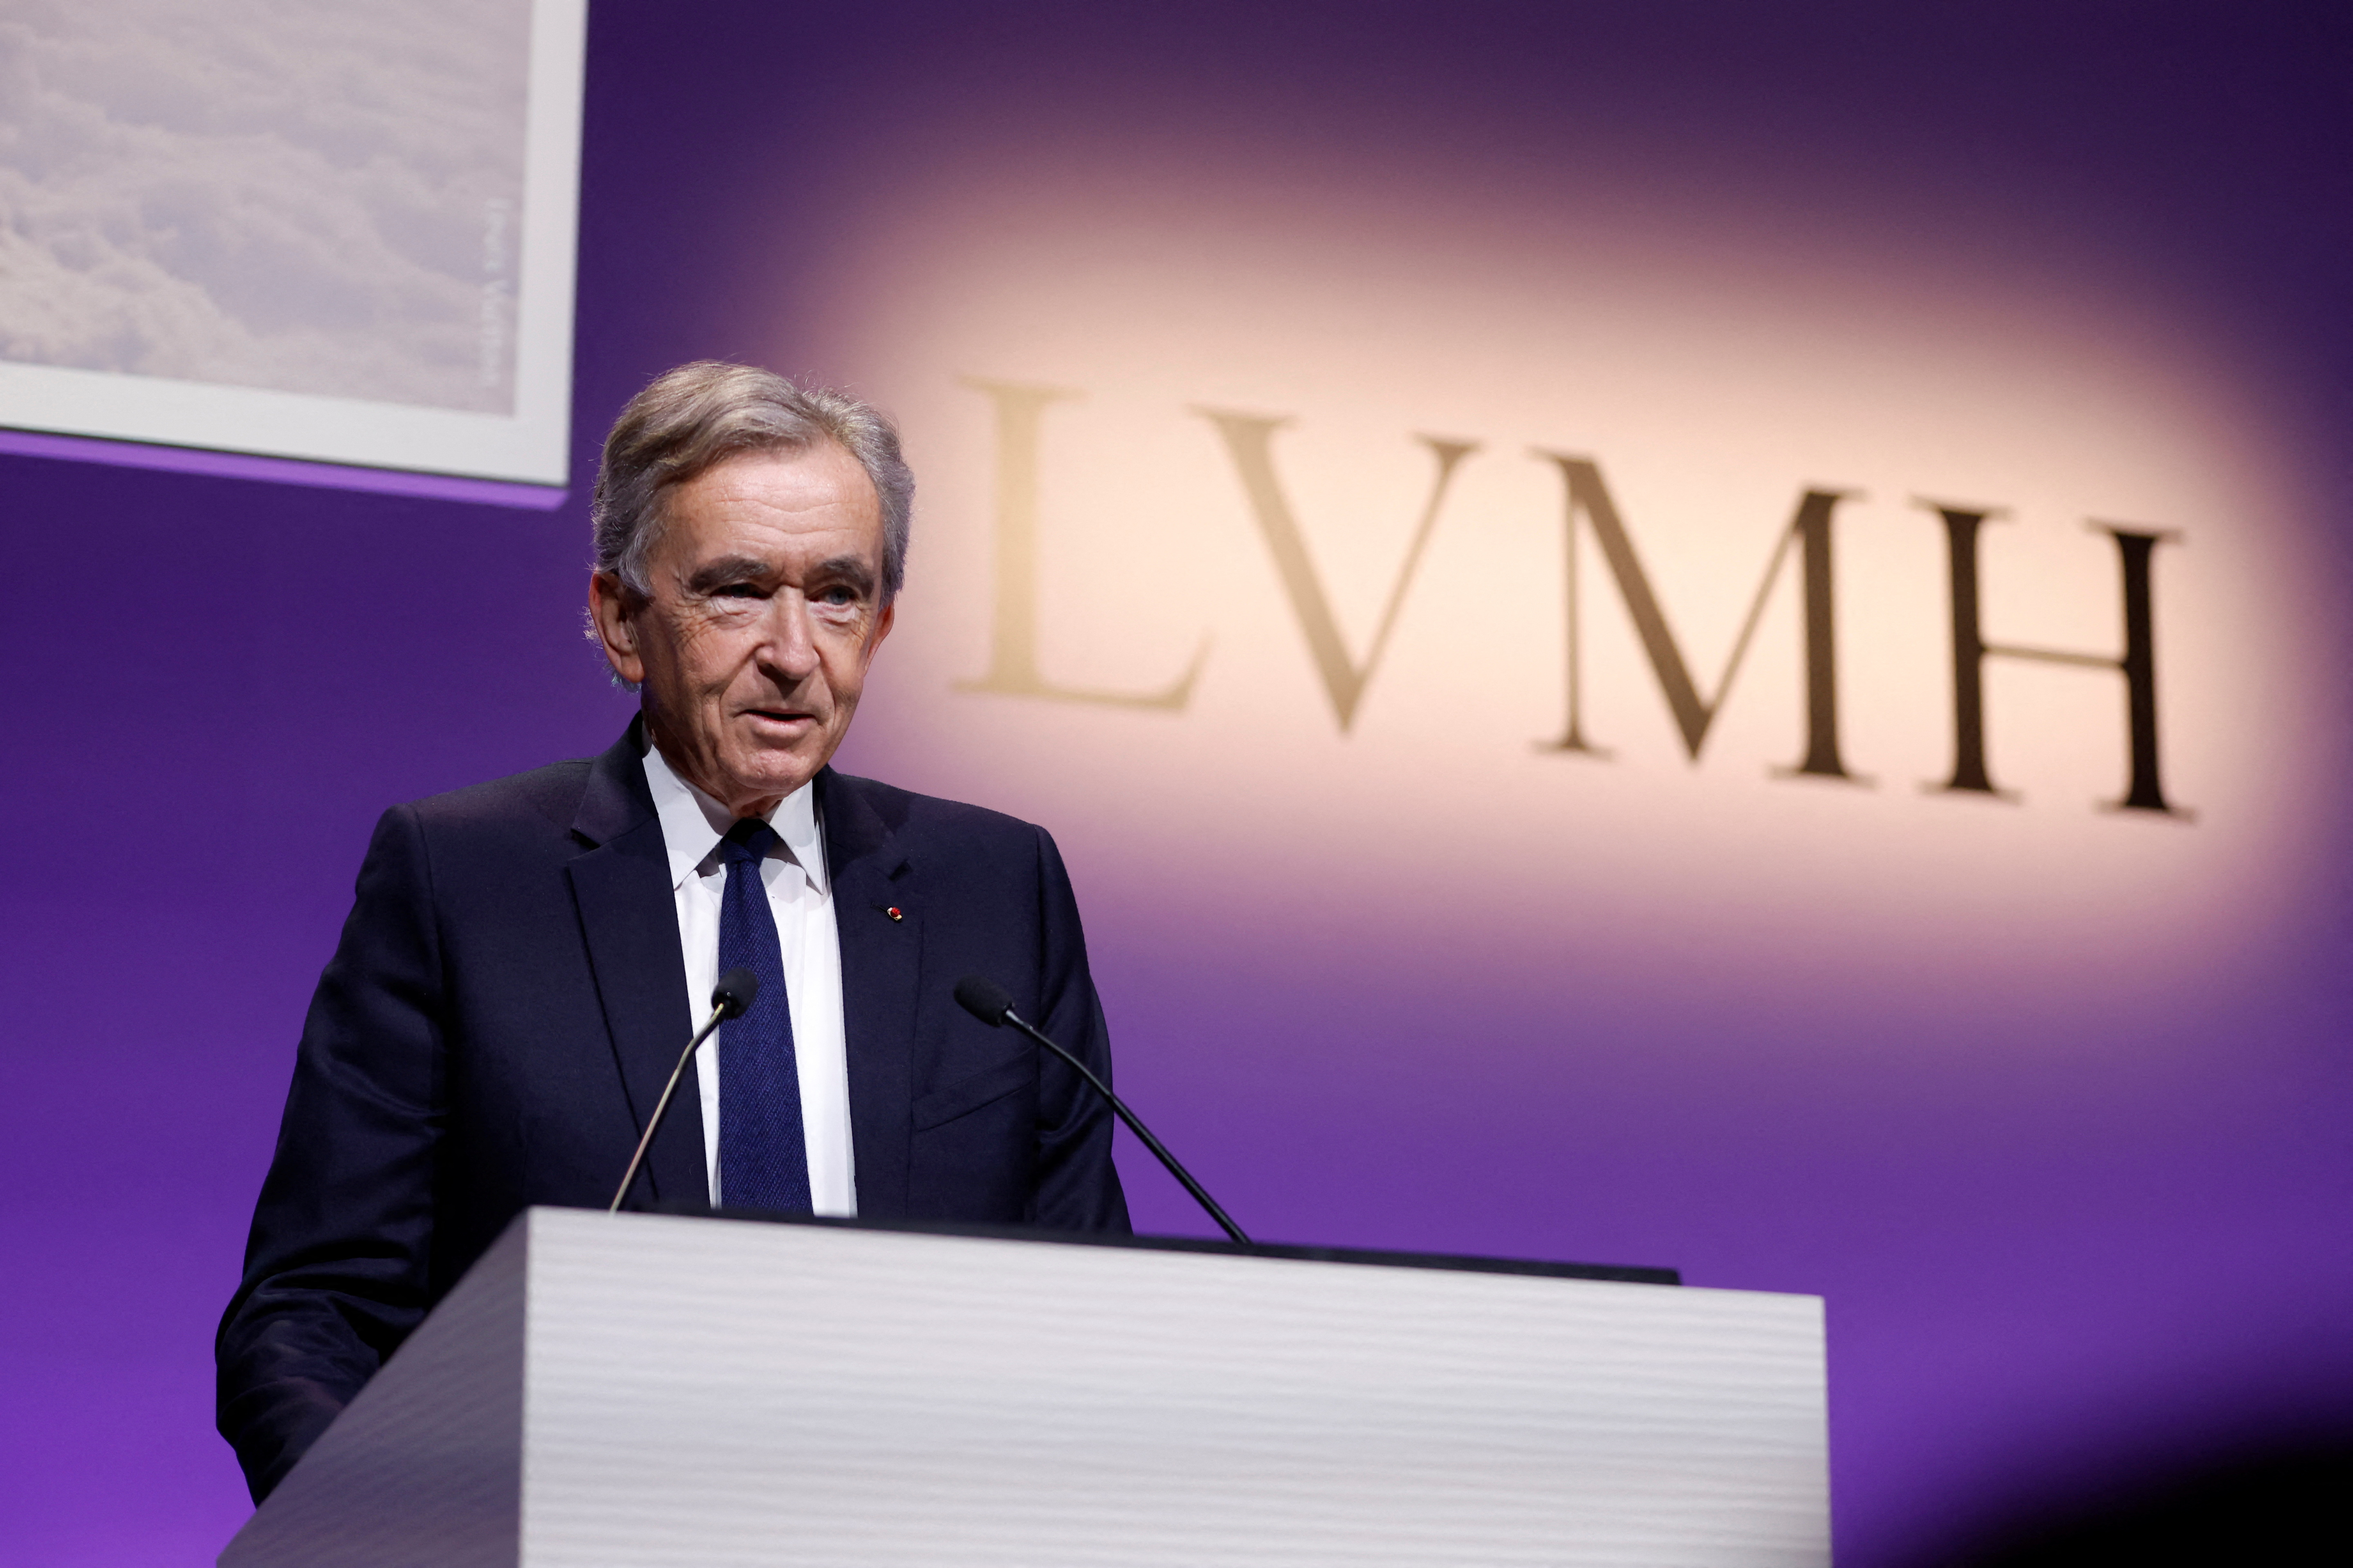 Revenue of the LVMH Group by segment worldwide 2022